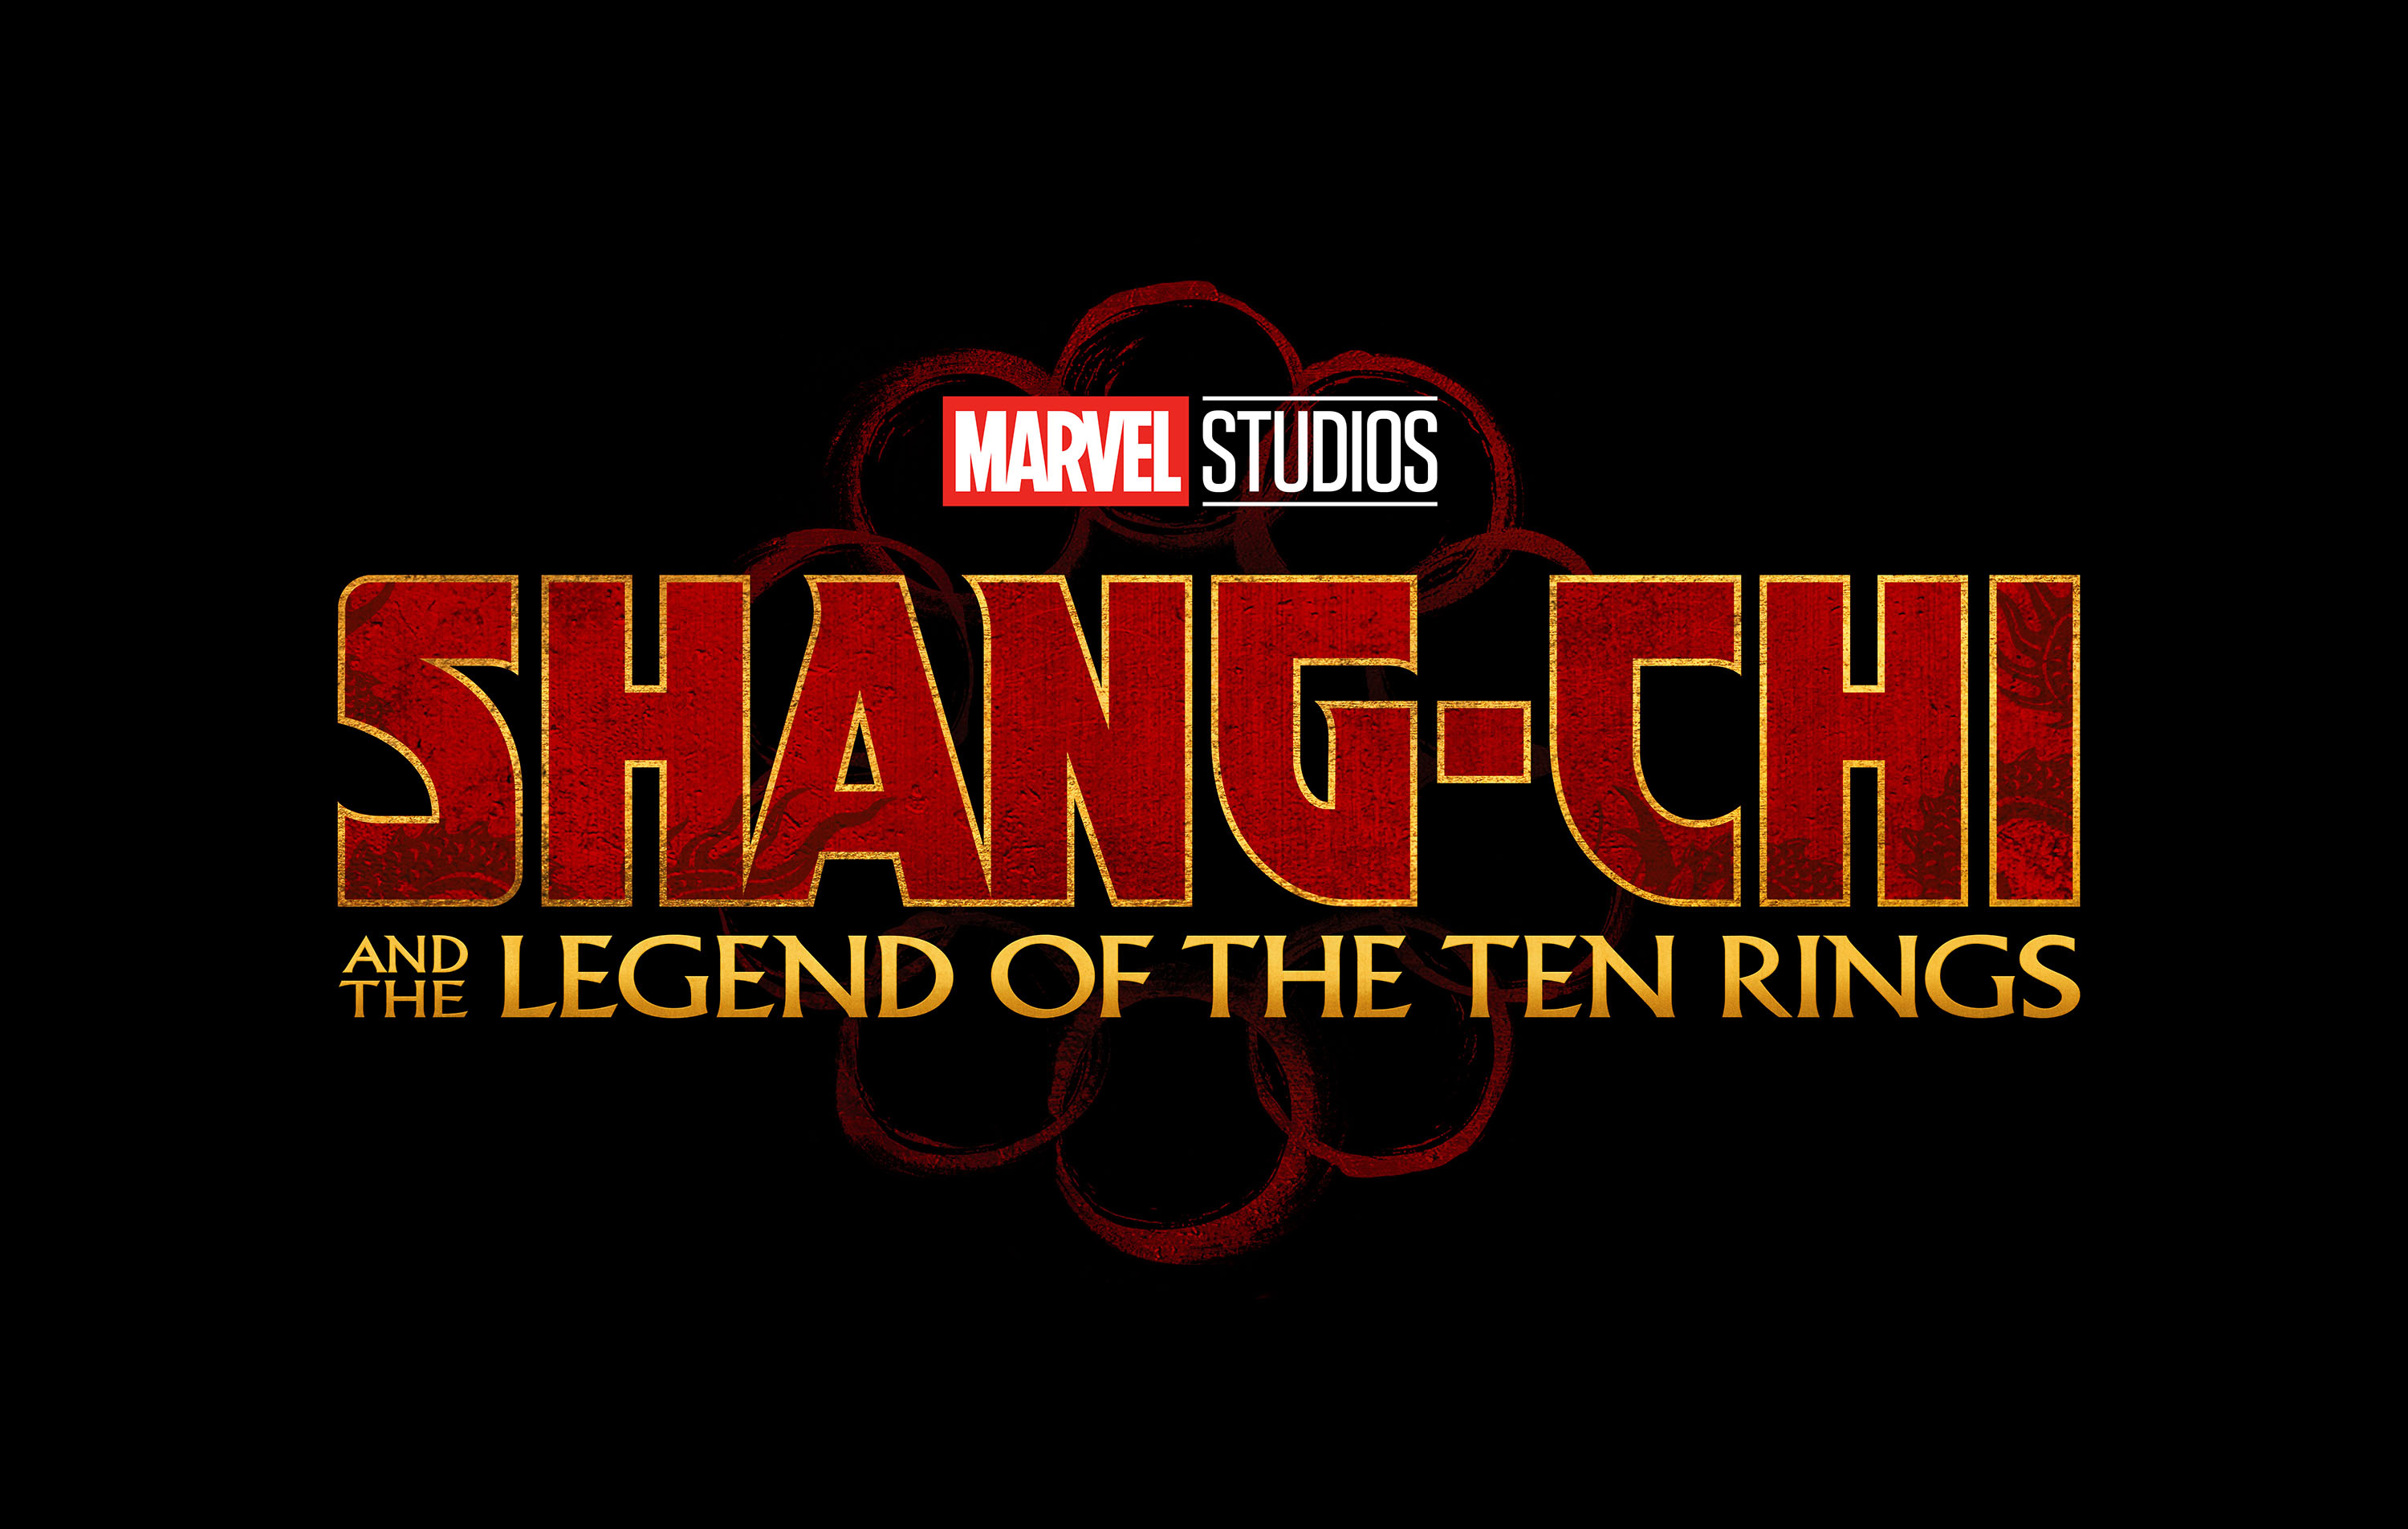 ‘Shang-Chi and the Legend of the Ten Rings’ Is An Action-Packed Origin Story Of Self-Discovery And Identity – Review